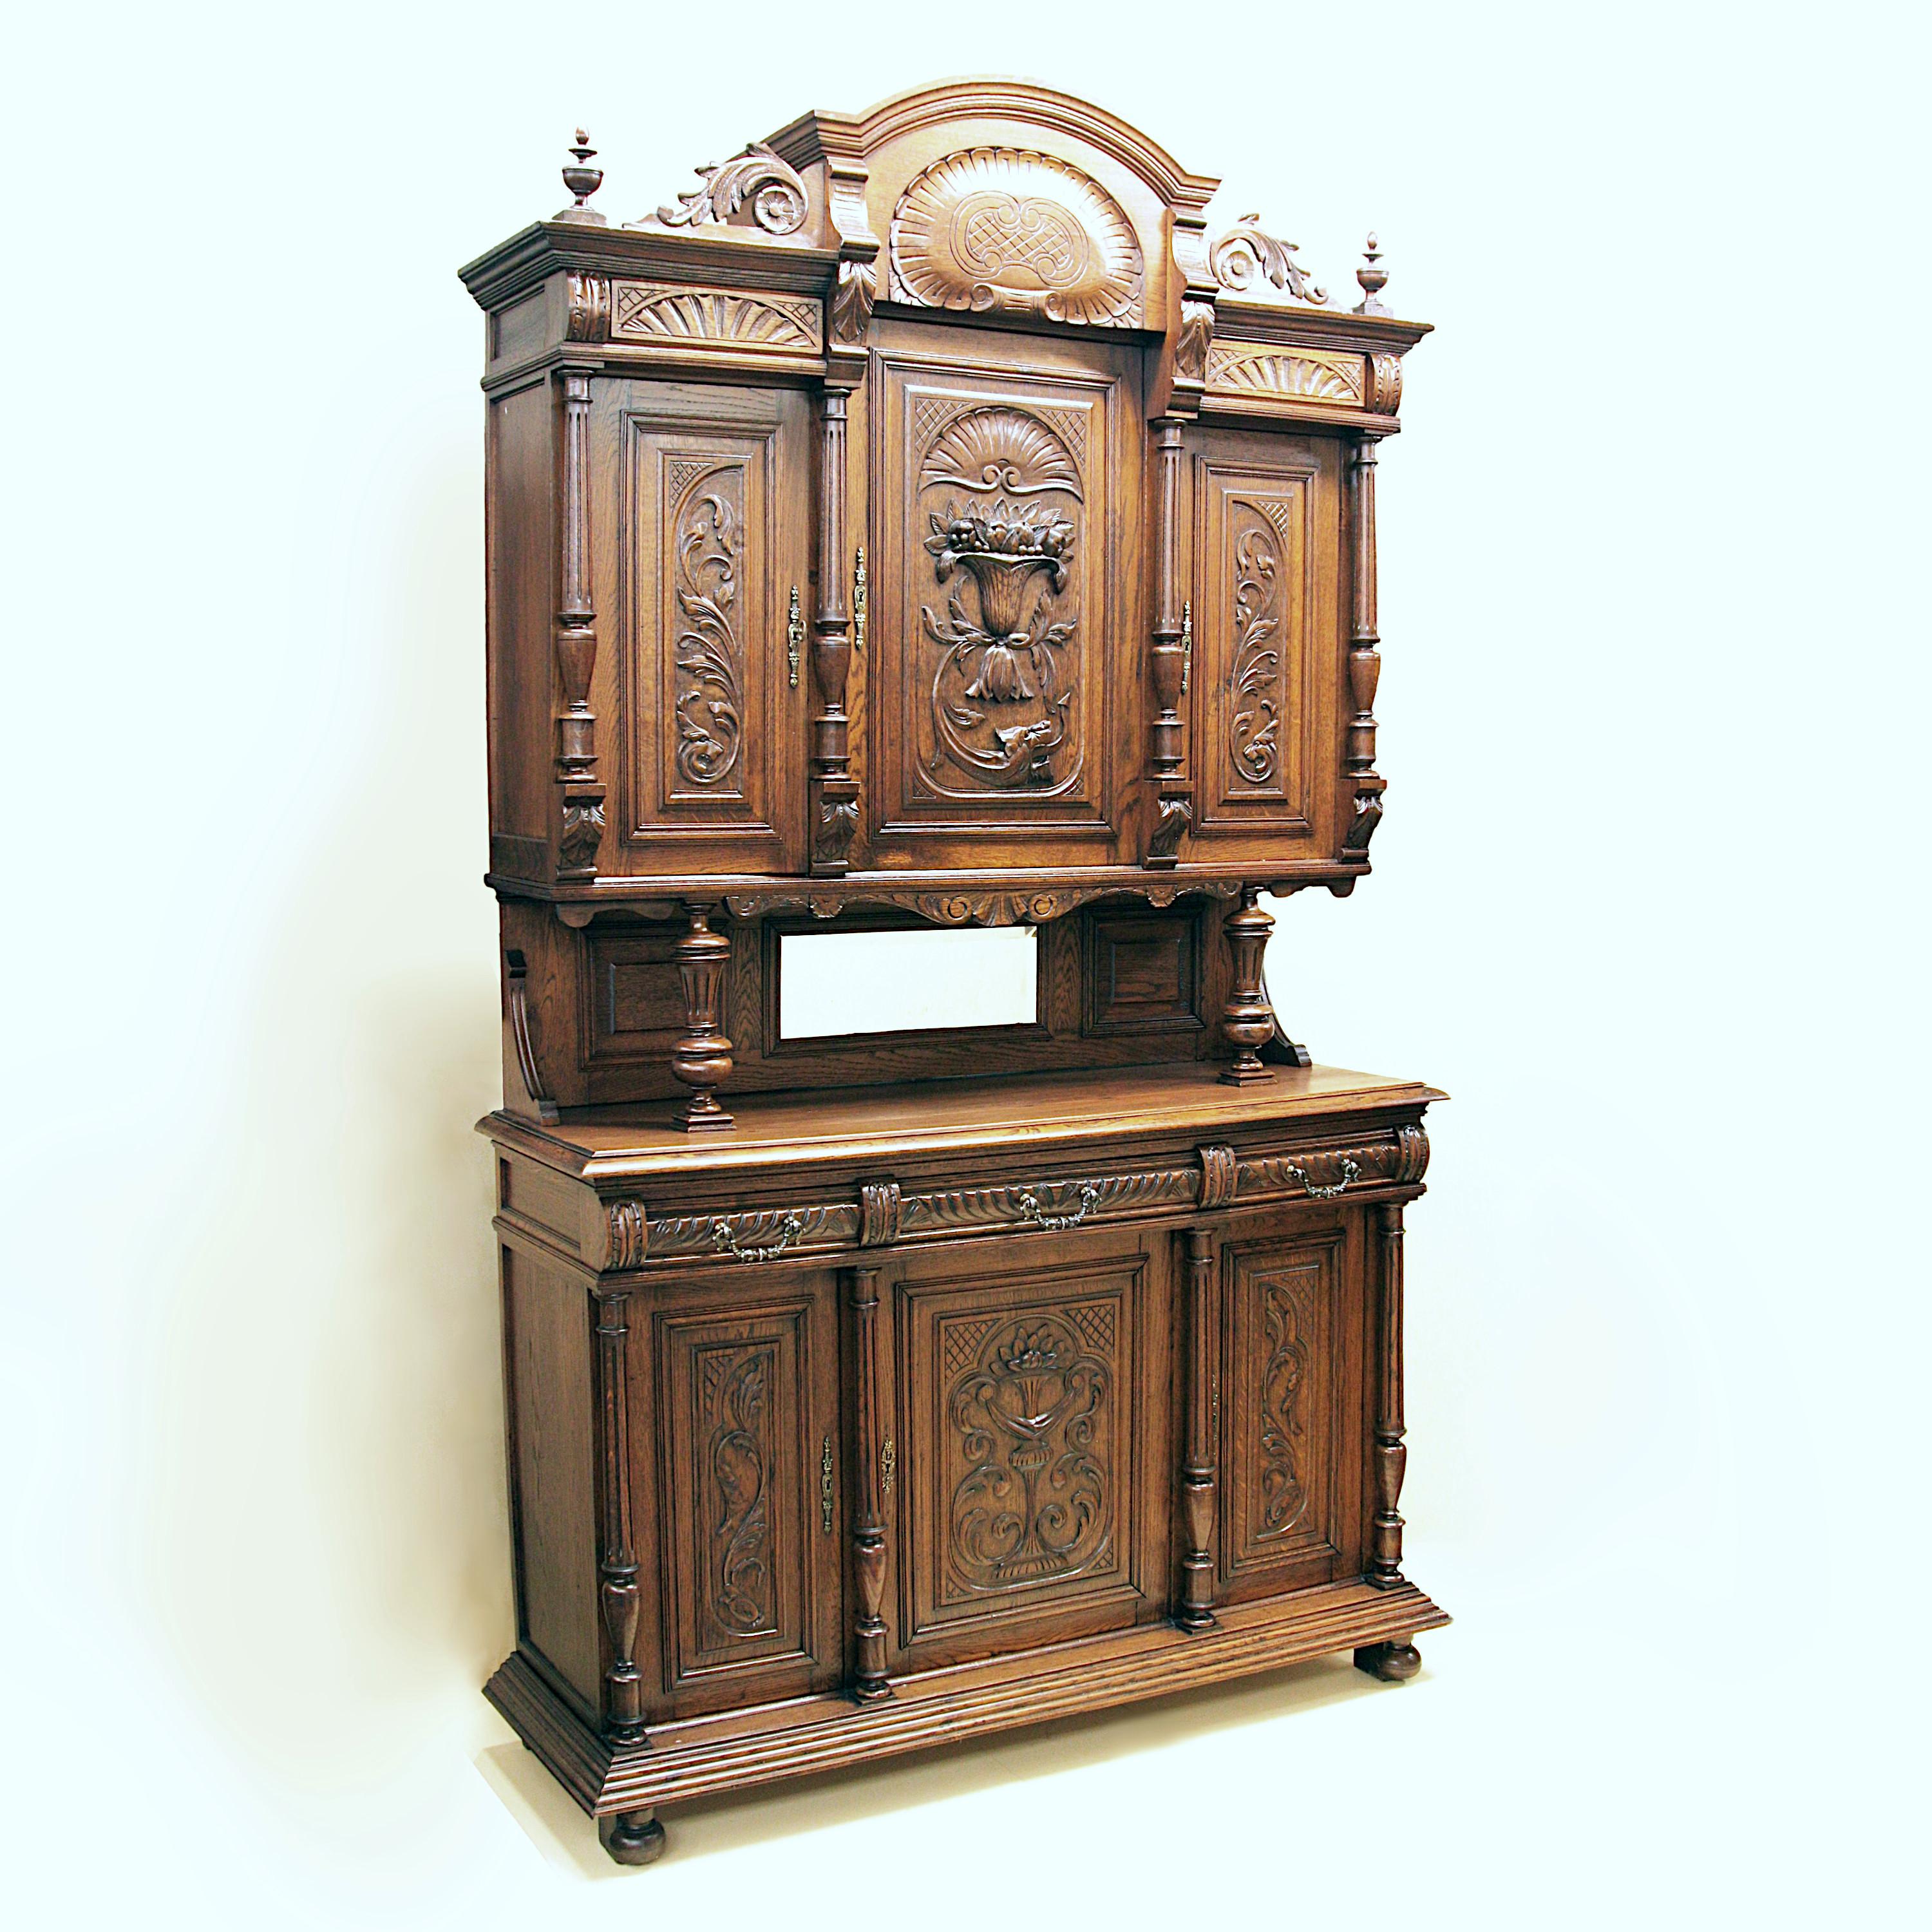 Wonderful turn-of-the-century English Victorian Break-Front Cabinet

Features include:

- Solid Oak construction
- High-relief carving throughout
- (3) Drawers
- (6) Doors
- (3) Interior shelves
- Solid Brass Hardware
- Mirror

This